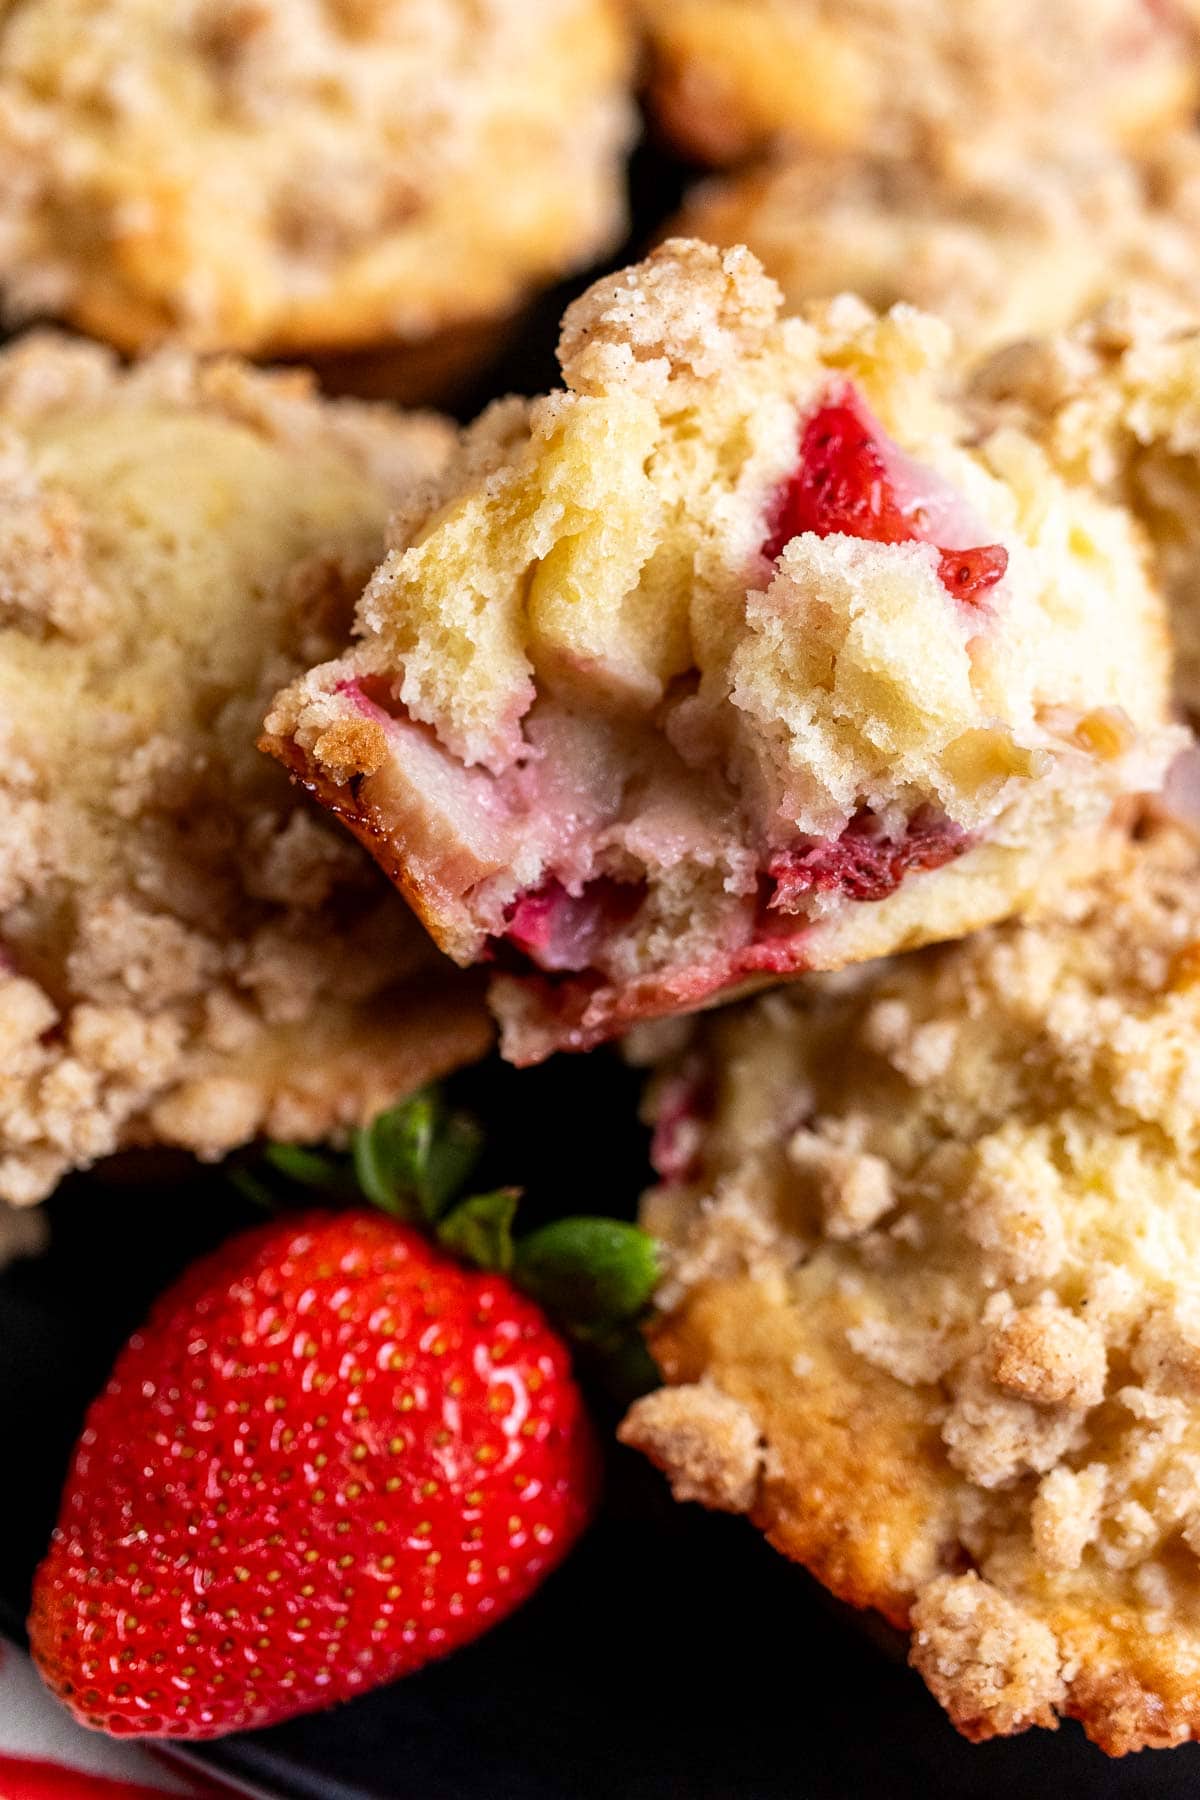 Strawberry rhubarb streusel muffins on a black plate with a large, red strawberry next to them and a muffin cut open on top of the others.